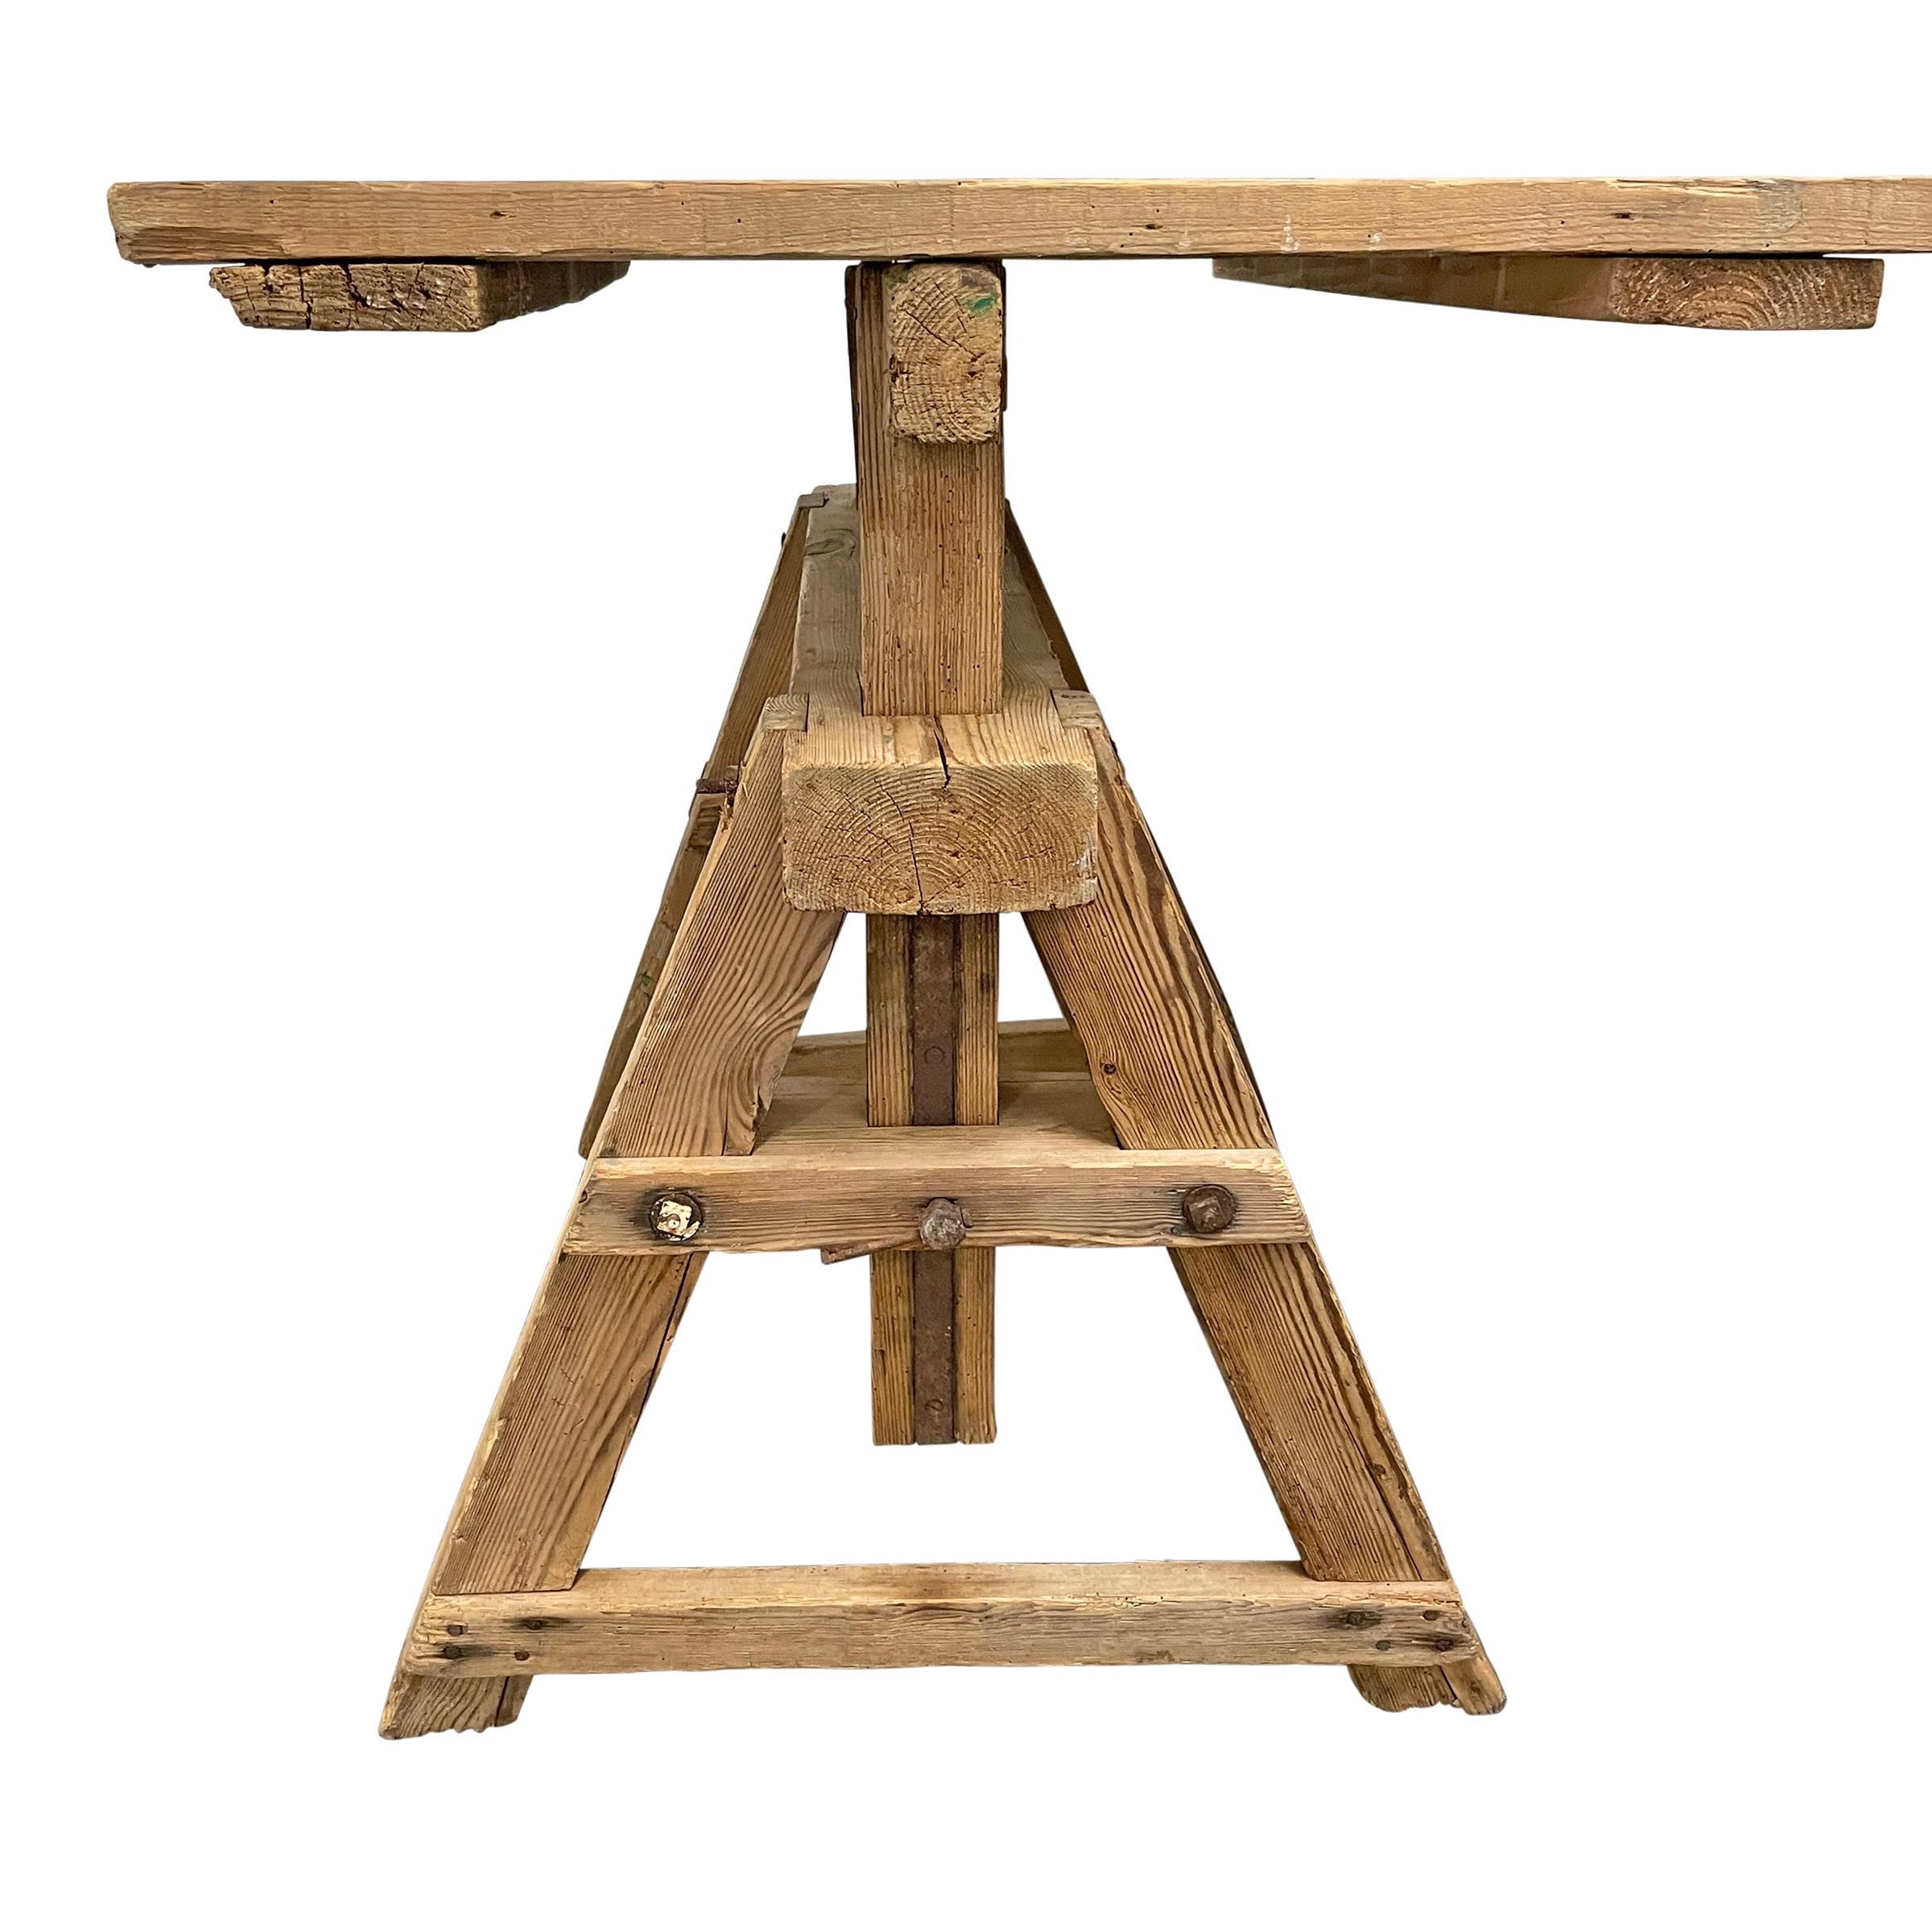 Early 20th Century American Adjustable Work Table 4